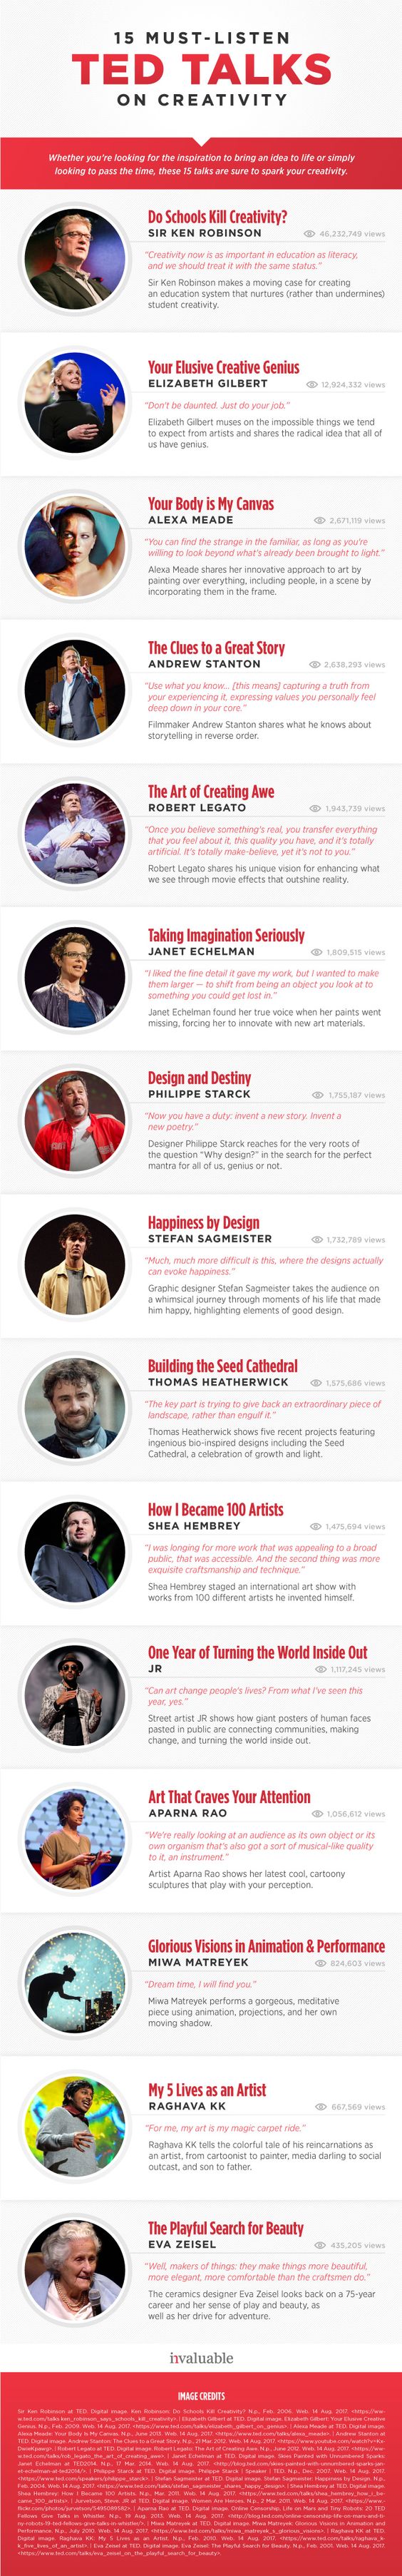 TED Talks infographic